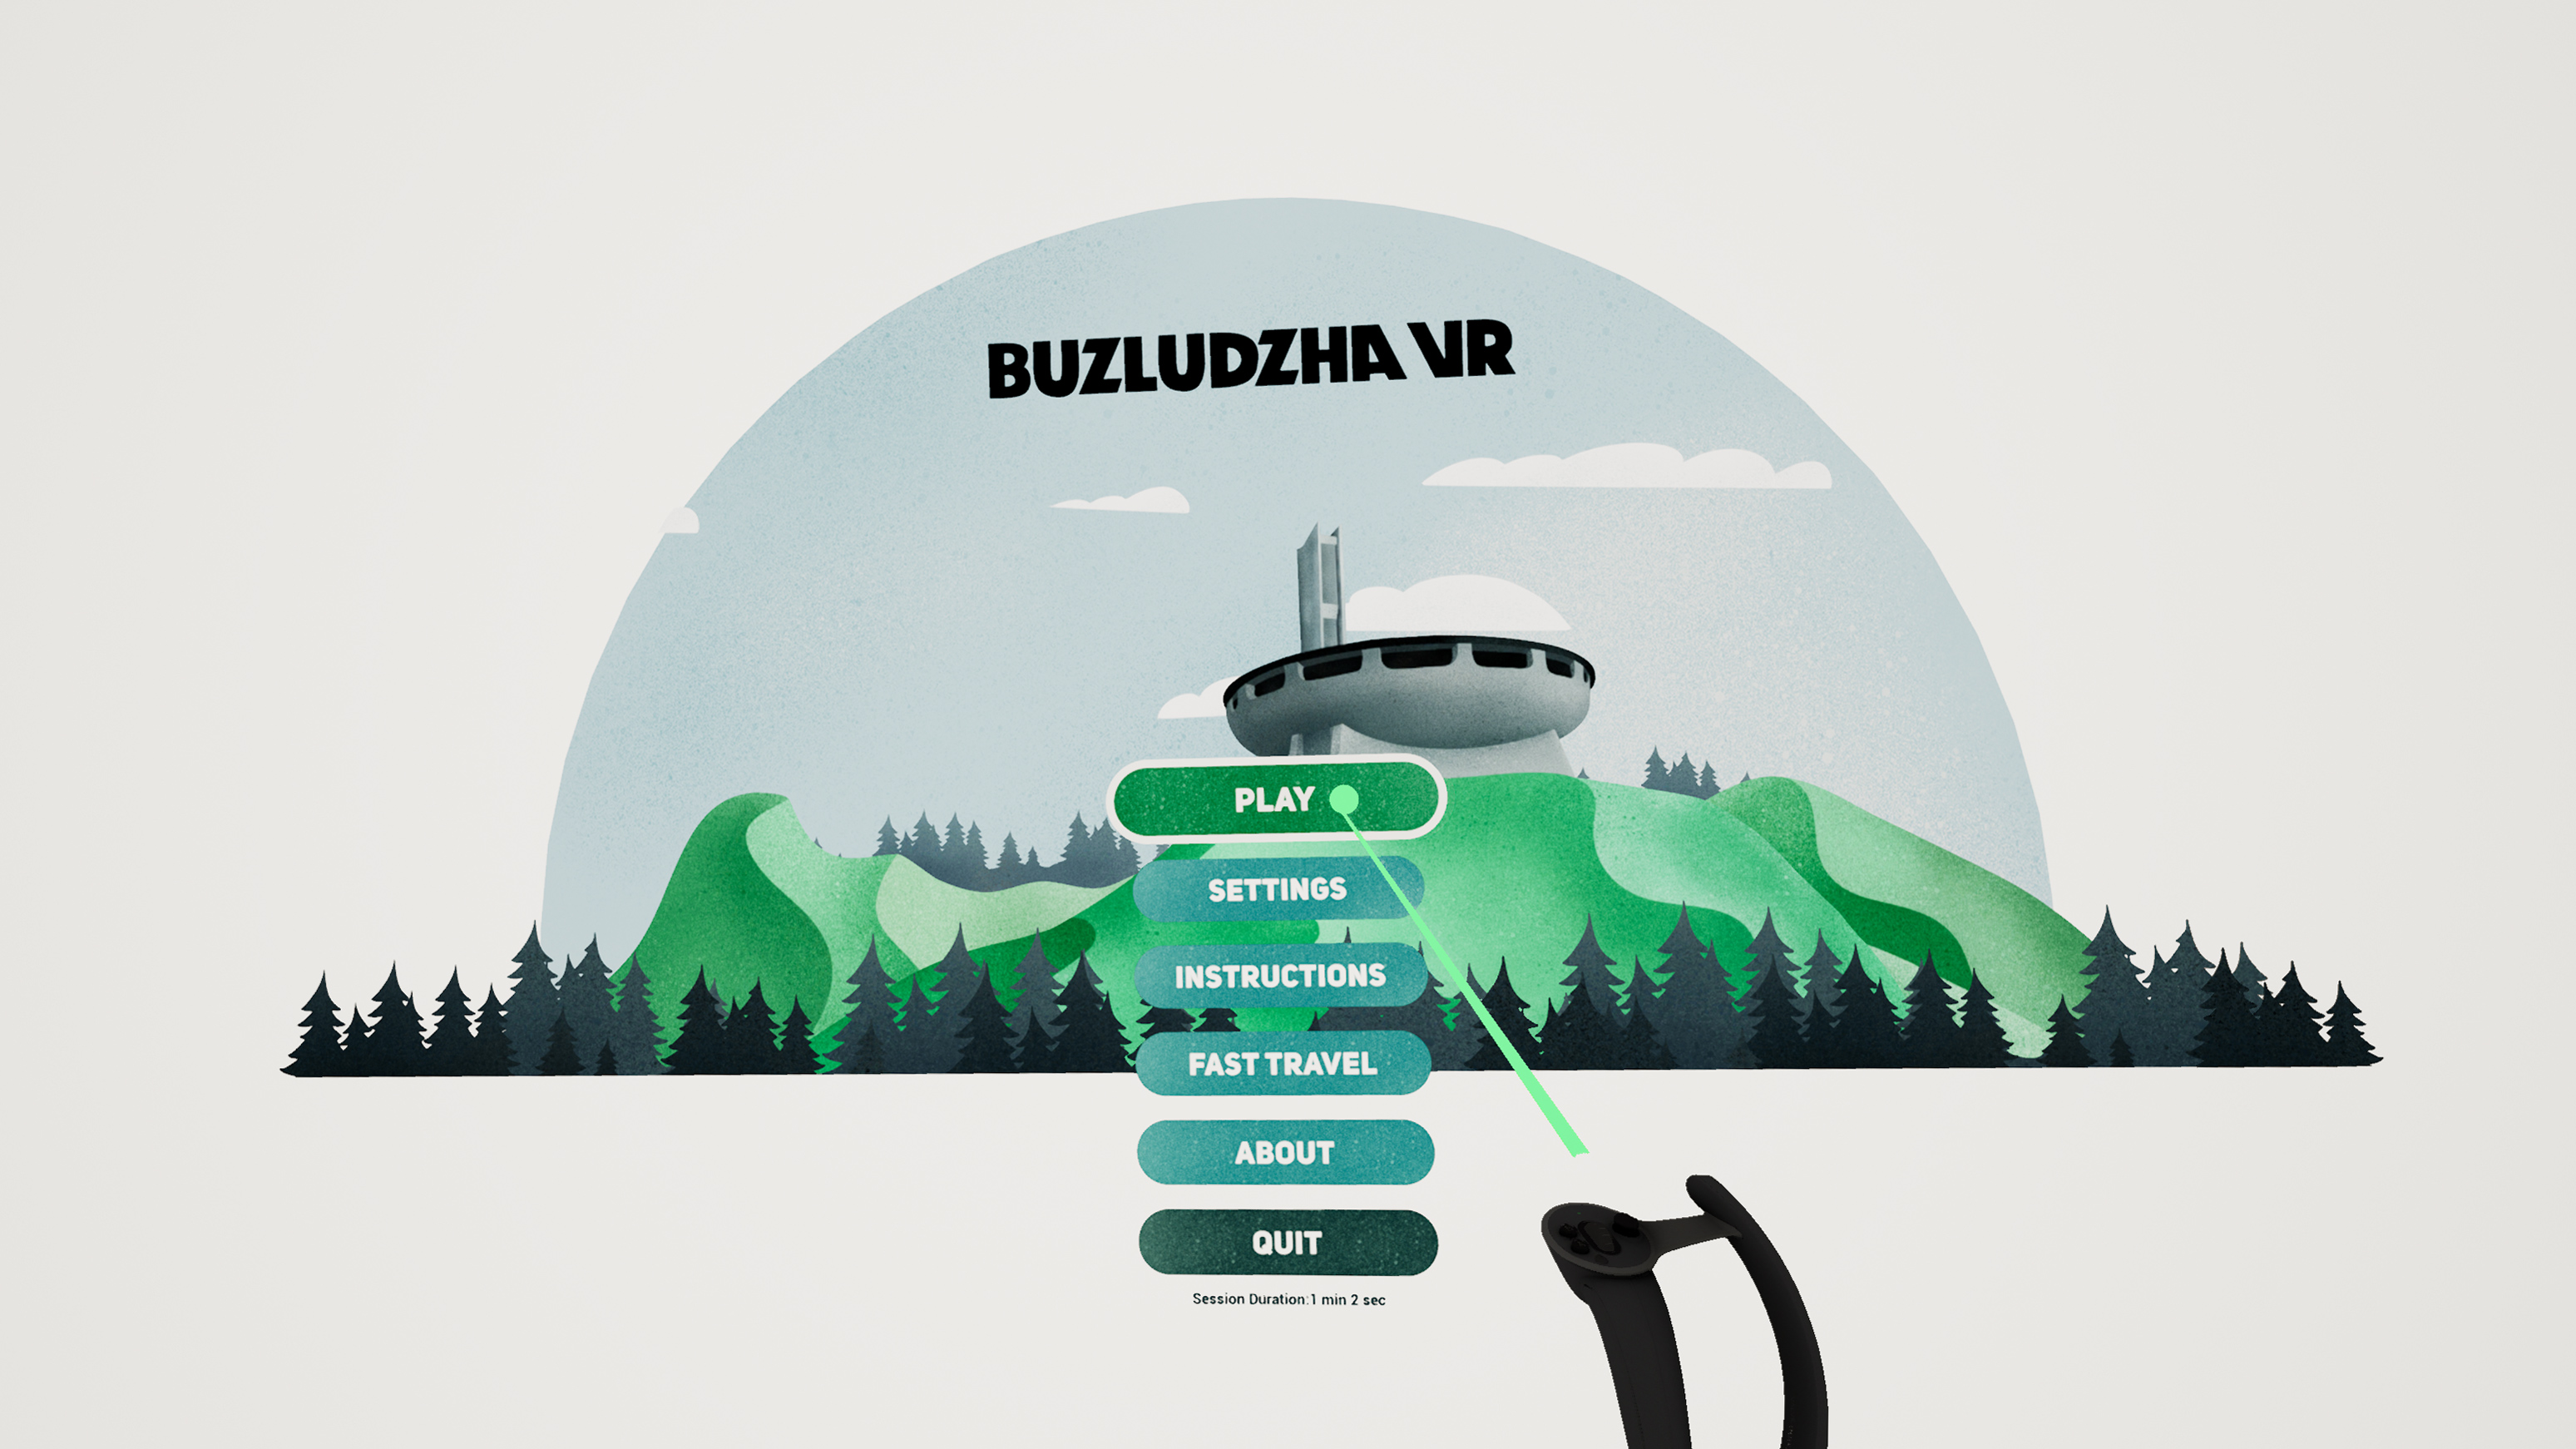 The image shows a stylised virtual reality (VR) game menu for "Buzludzha VR." The menu is set against a simplified, artistic backdrop that features a green and white landscape with pine trees and a stylised representation of the Buzludzha monument in the centre. A semi-transparent white dome with a cut-off top overlays the scene, adding a sense of dimension. The game menu options are displayed on green tags with white text and include "PLAY," "SETTINGS," "INSTRUCTIONS," "FAST TRAVEL," "ABOUT," and "QUIT." A VR controller is depicted in the lower right-hand corner, with a green line pointing to the "PLAY" option, indicating the selection. At the bottom, there's a session timer showing "Session Duration: 1 min 2 sec." The overall design is clean and modern with a minimalistic aesthetic.